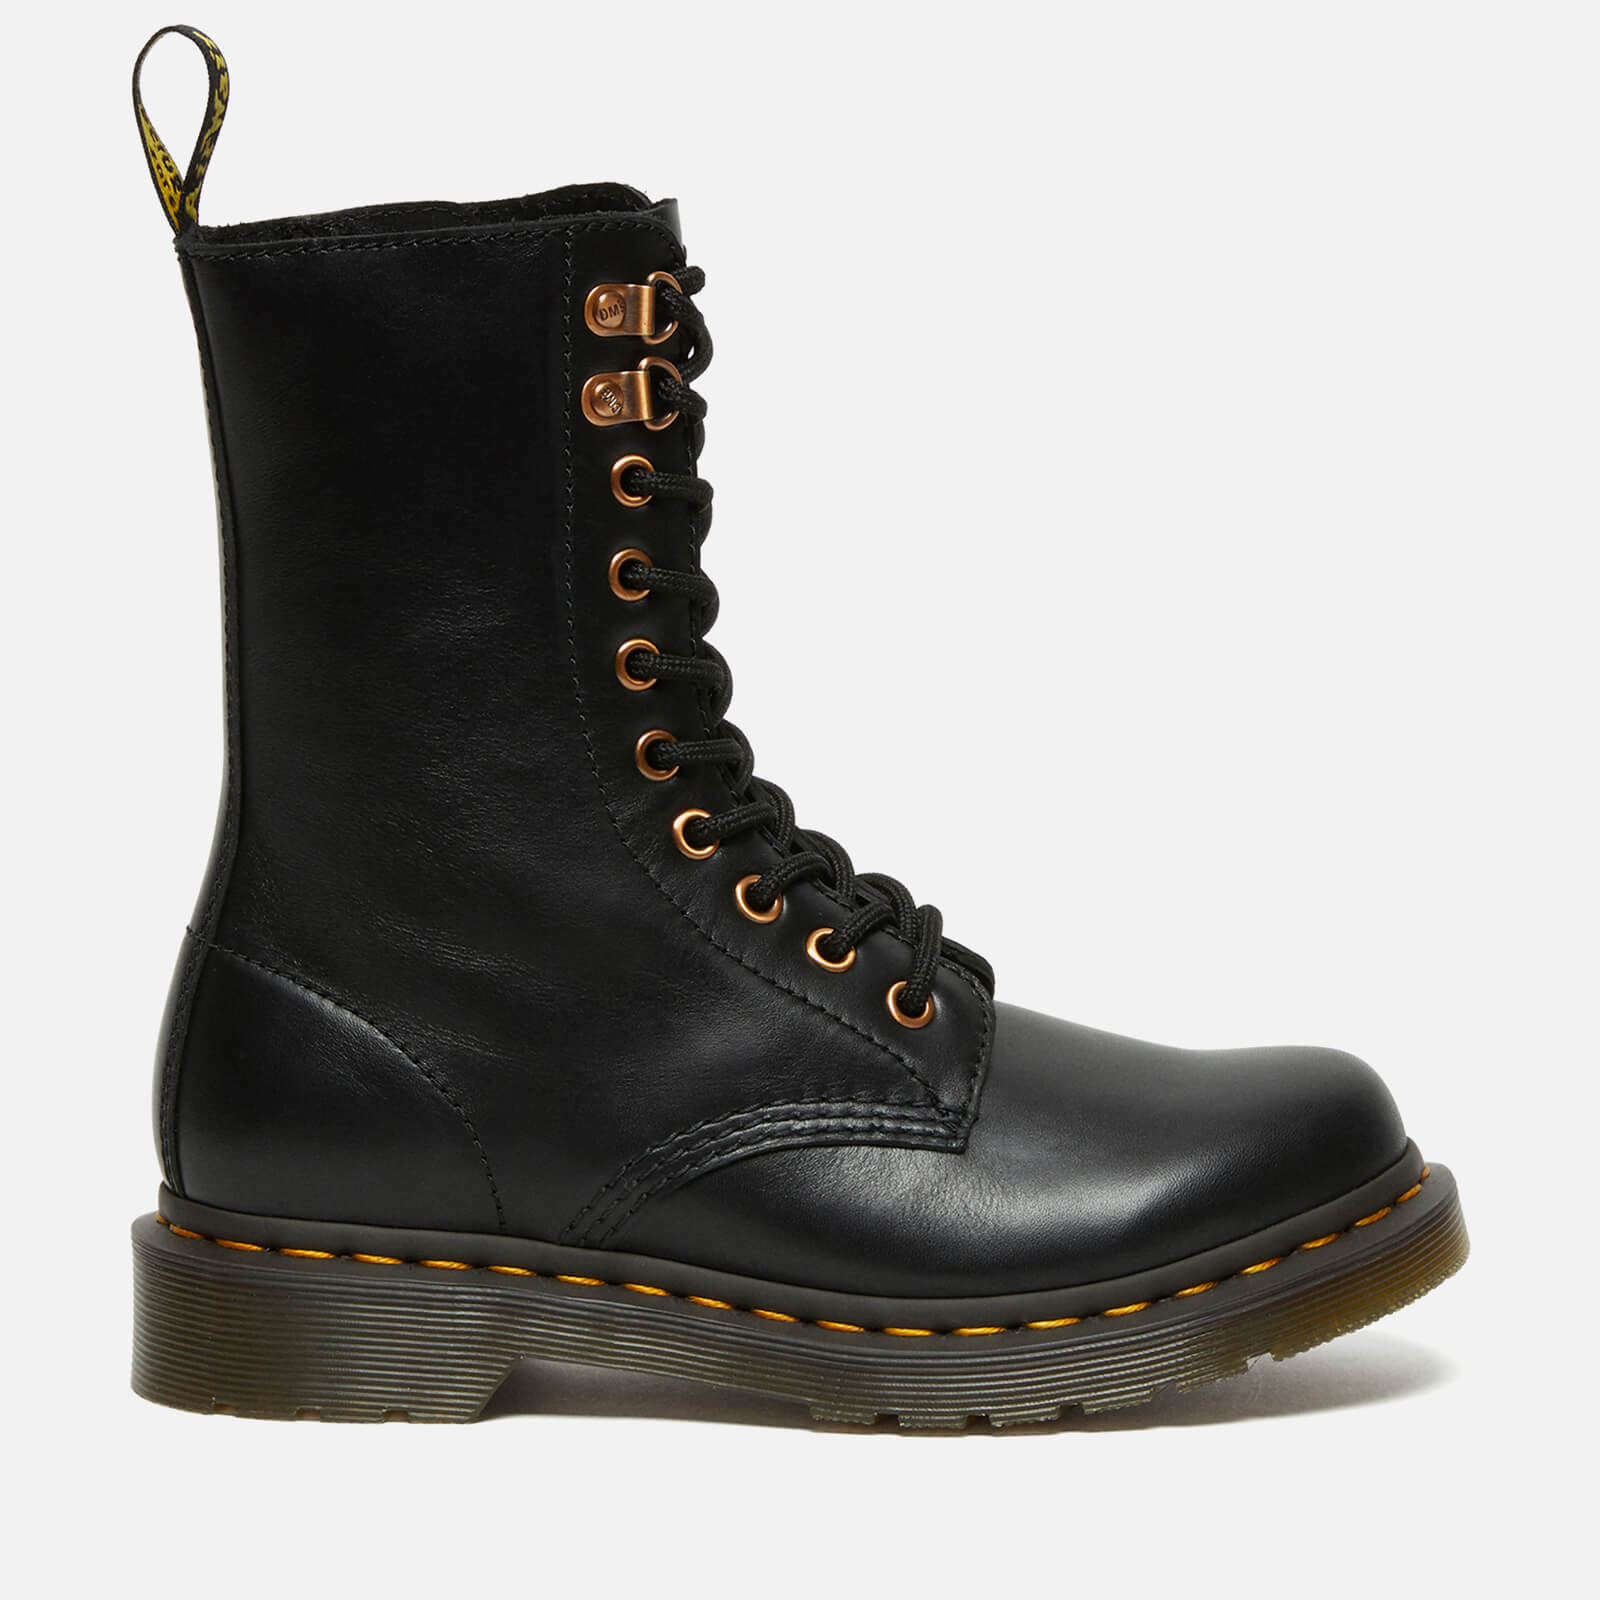 Dr. Martens Women’s 1490 Wanama Leather Boots